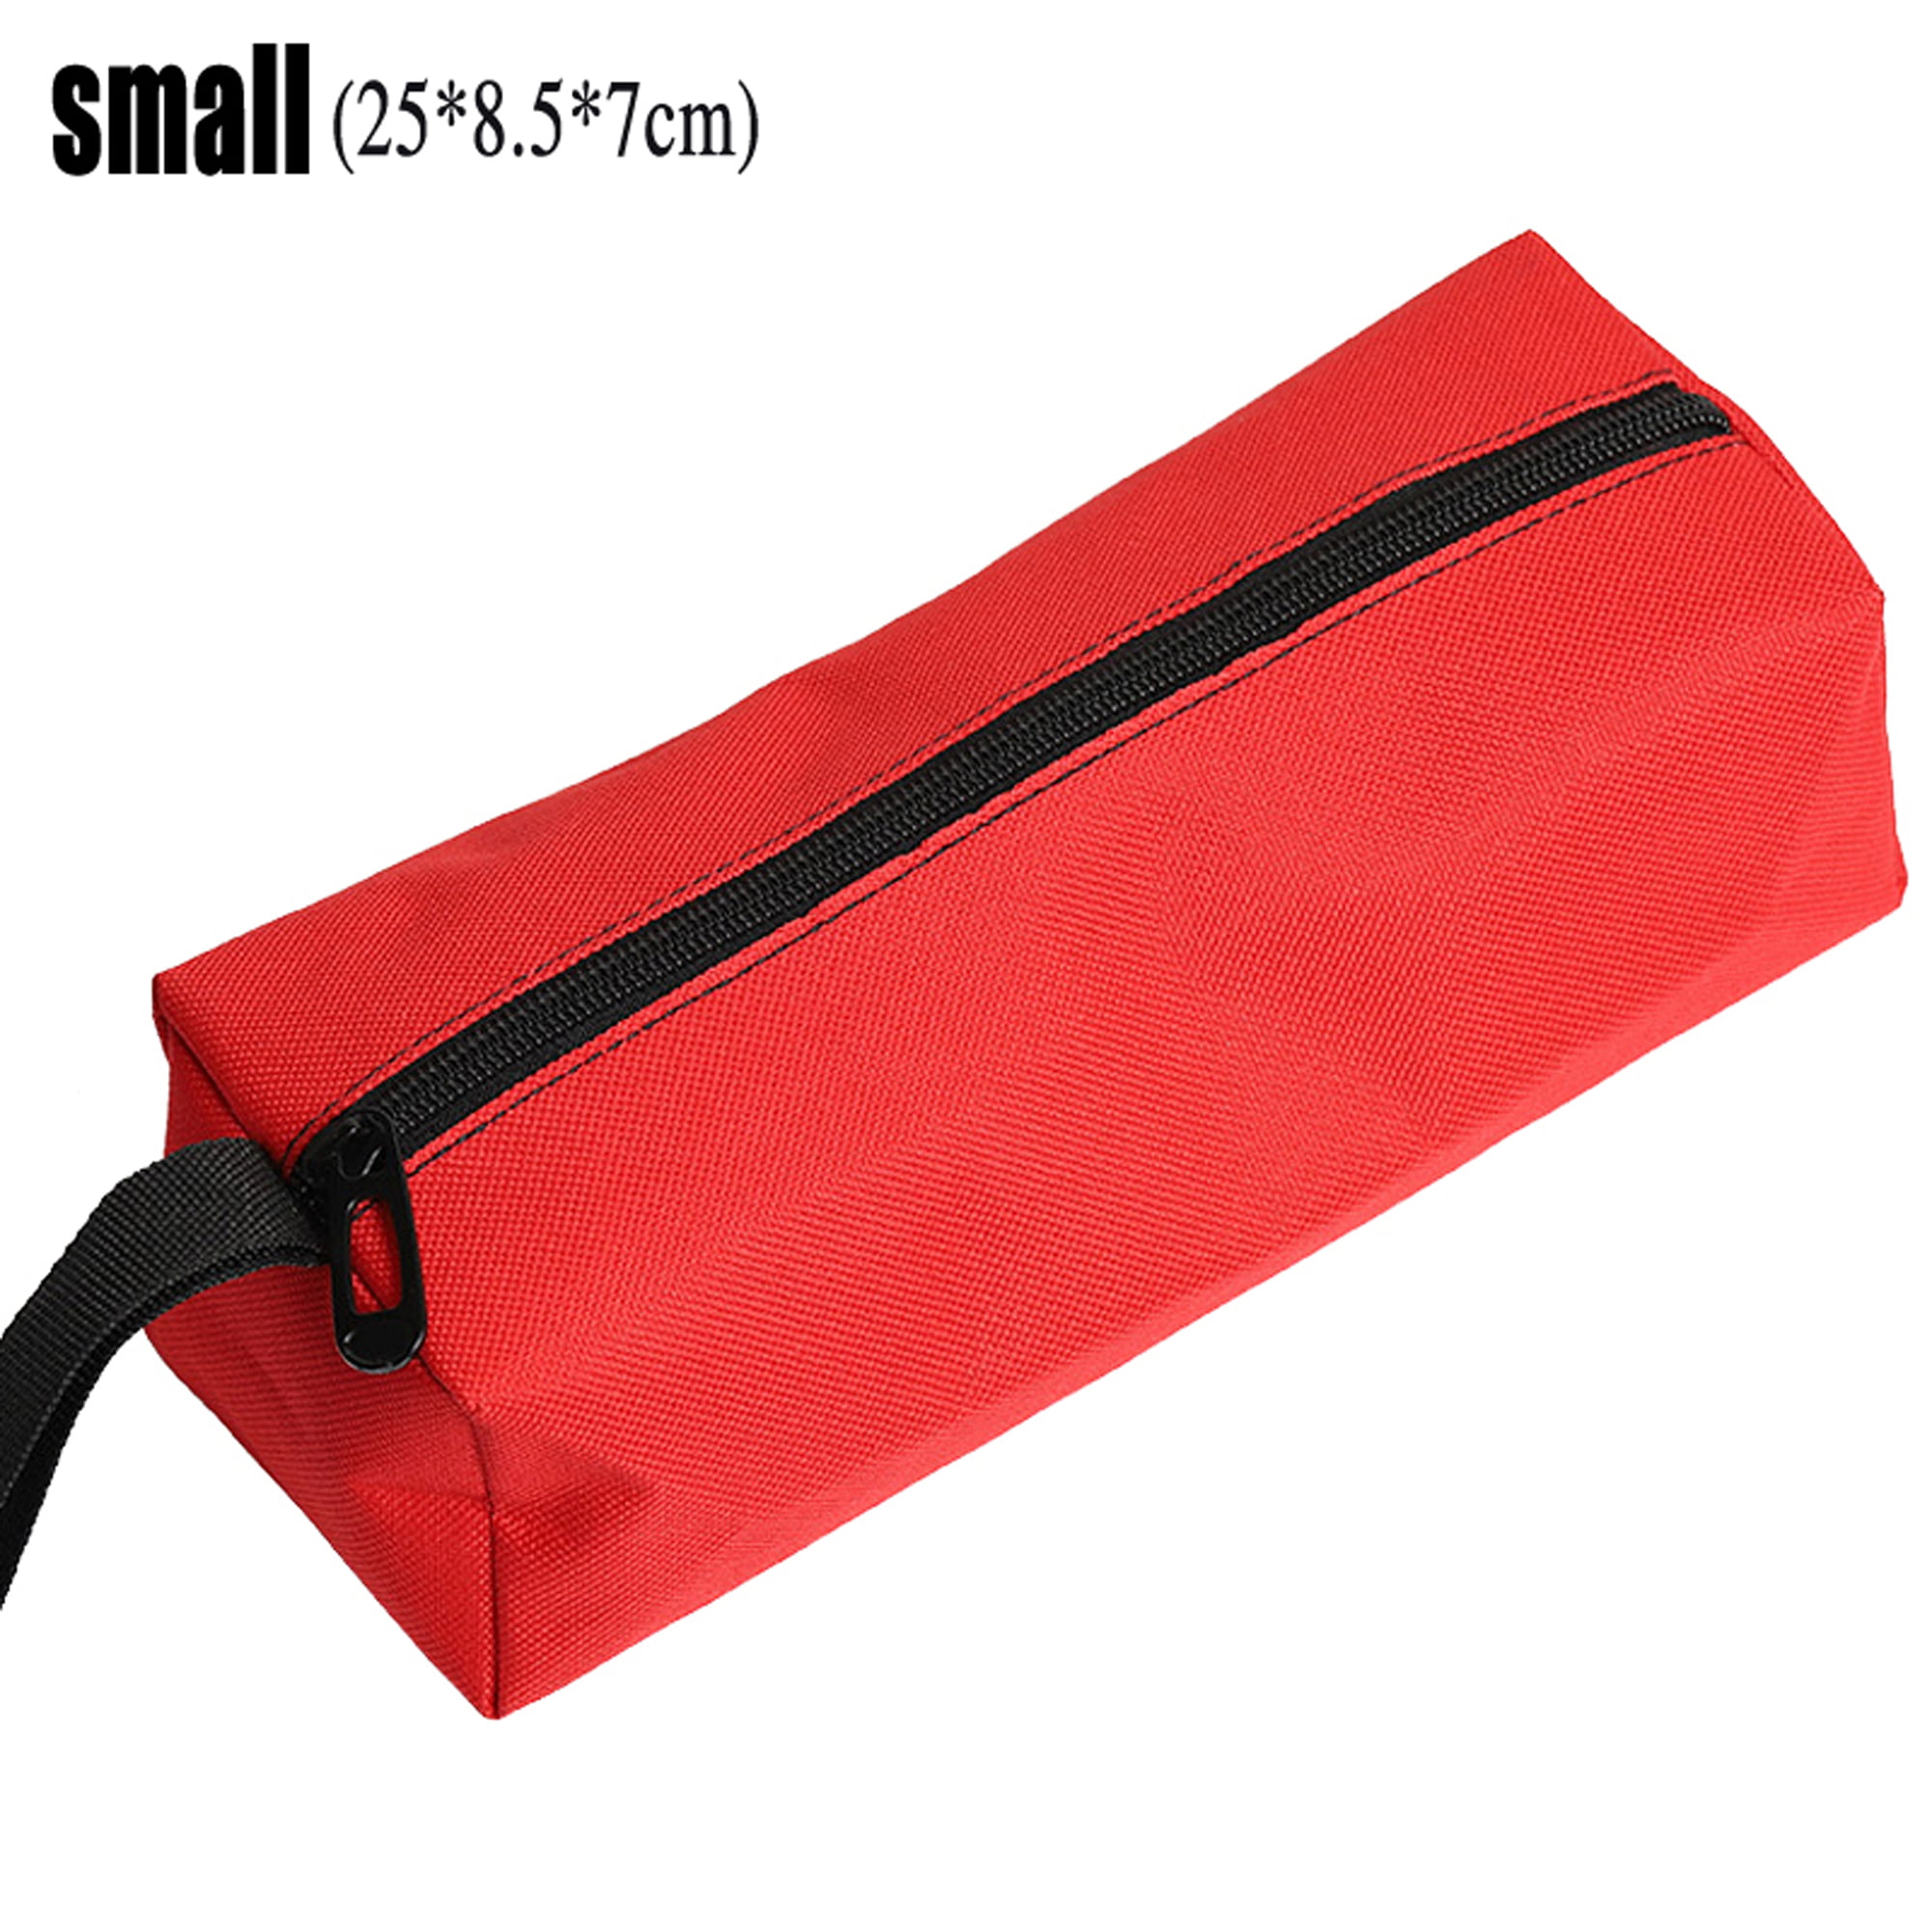 Tool Storage Bag Spanner Zip Pocket Organizer Carry Case Pouch Electrician Bag 